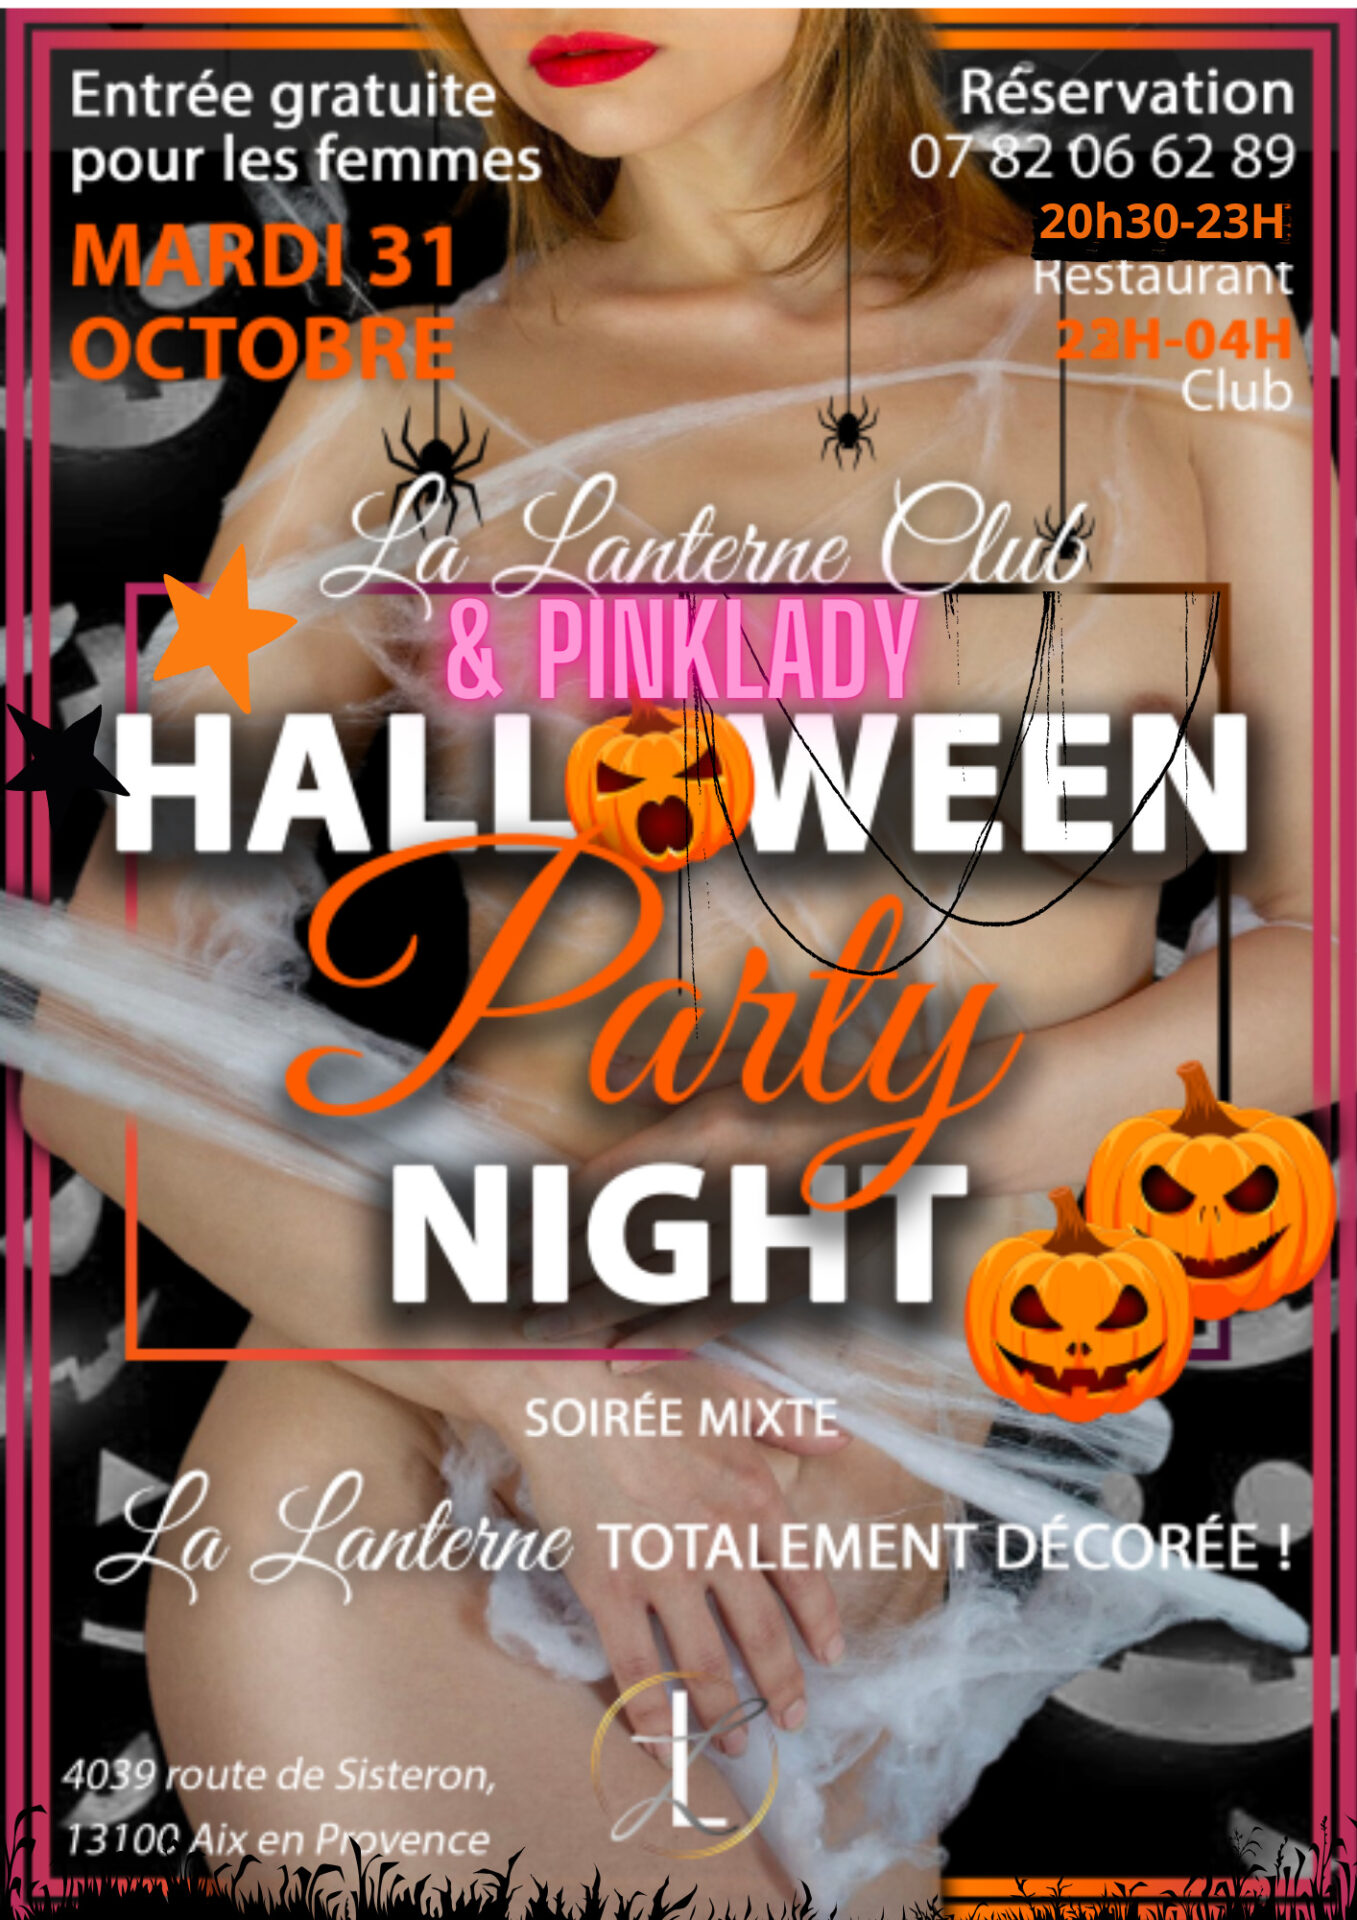 woman-halloween-party-pinklady